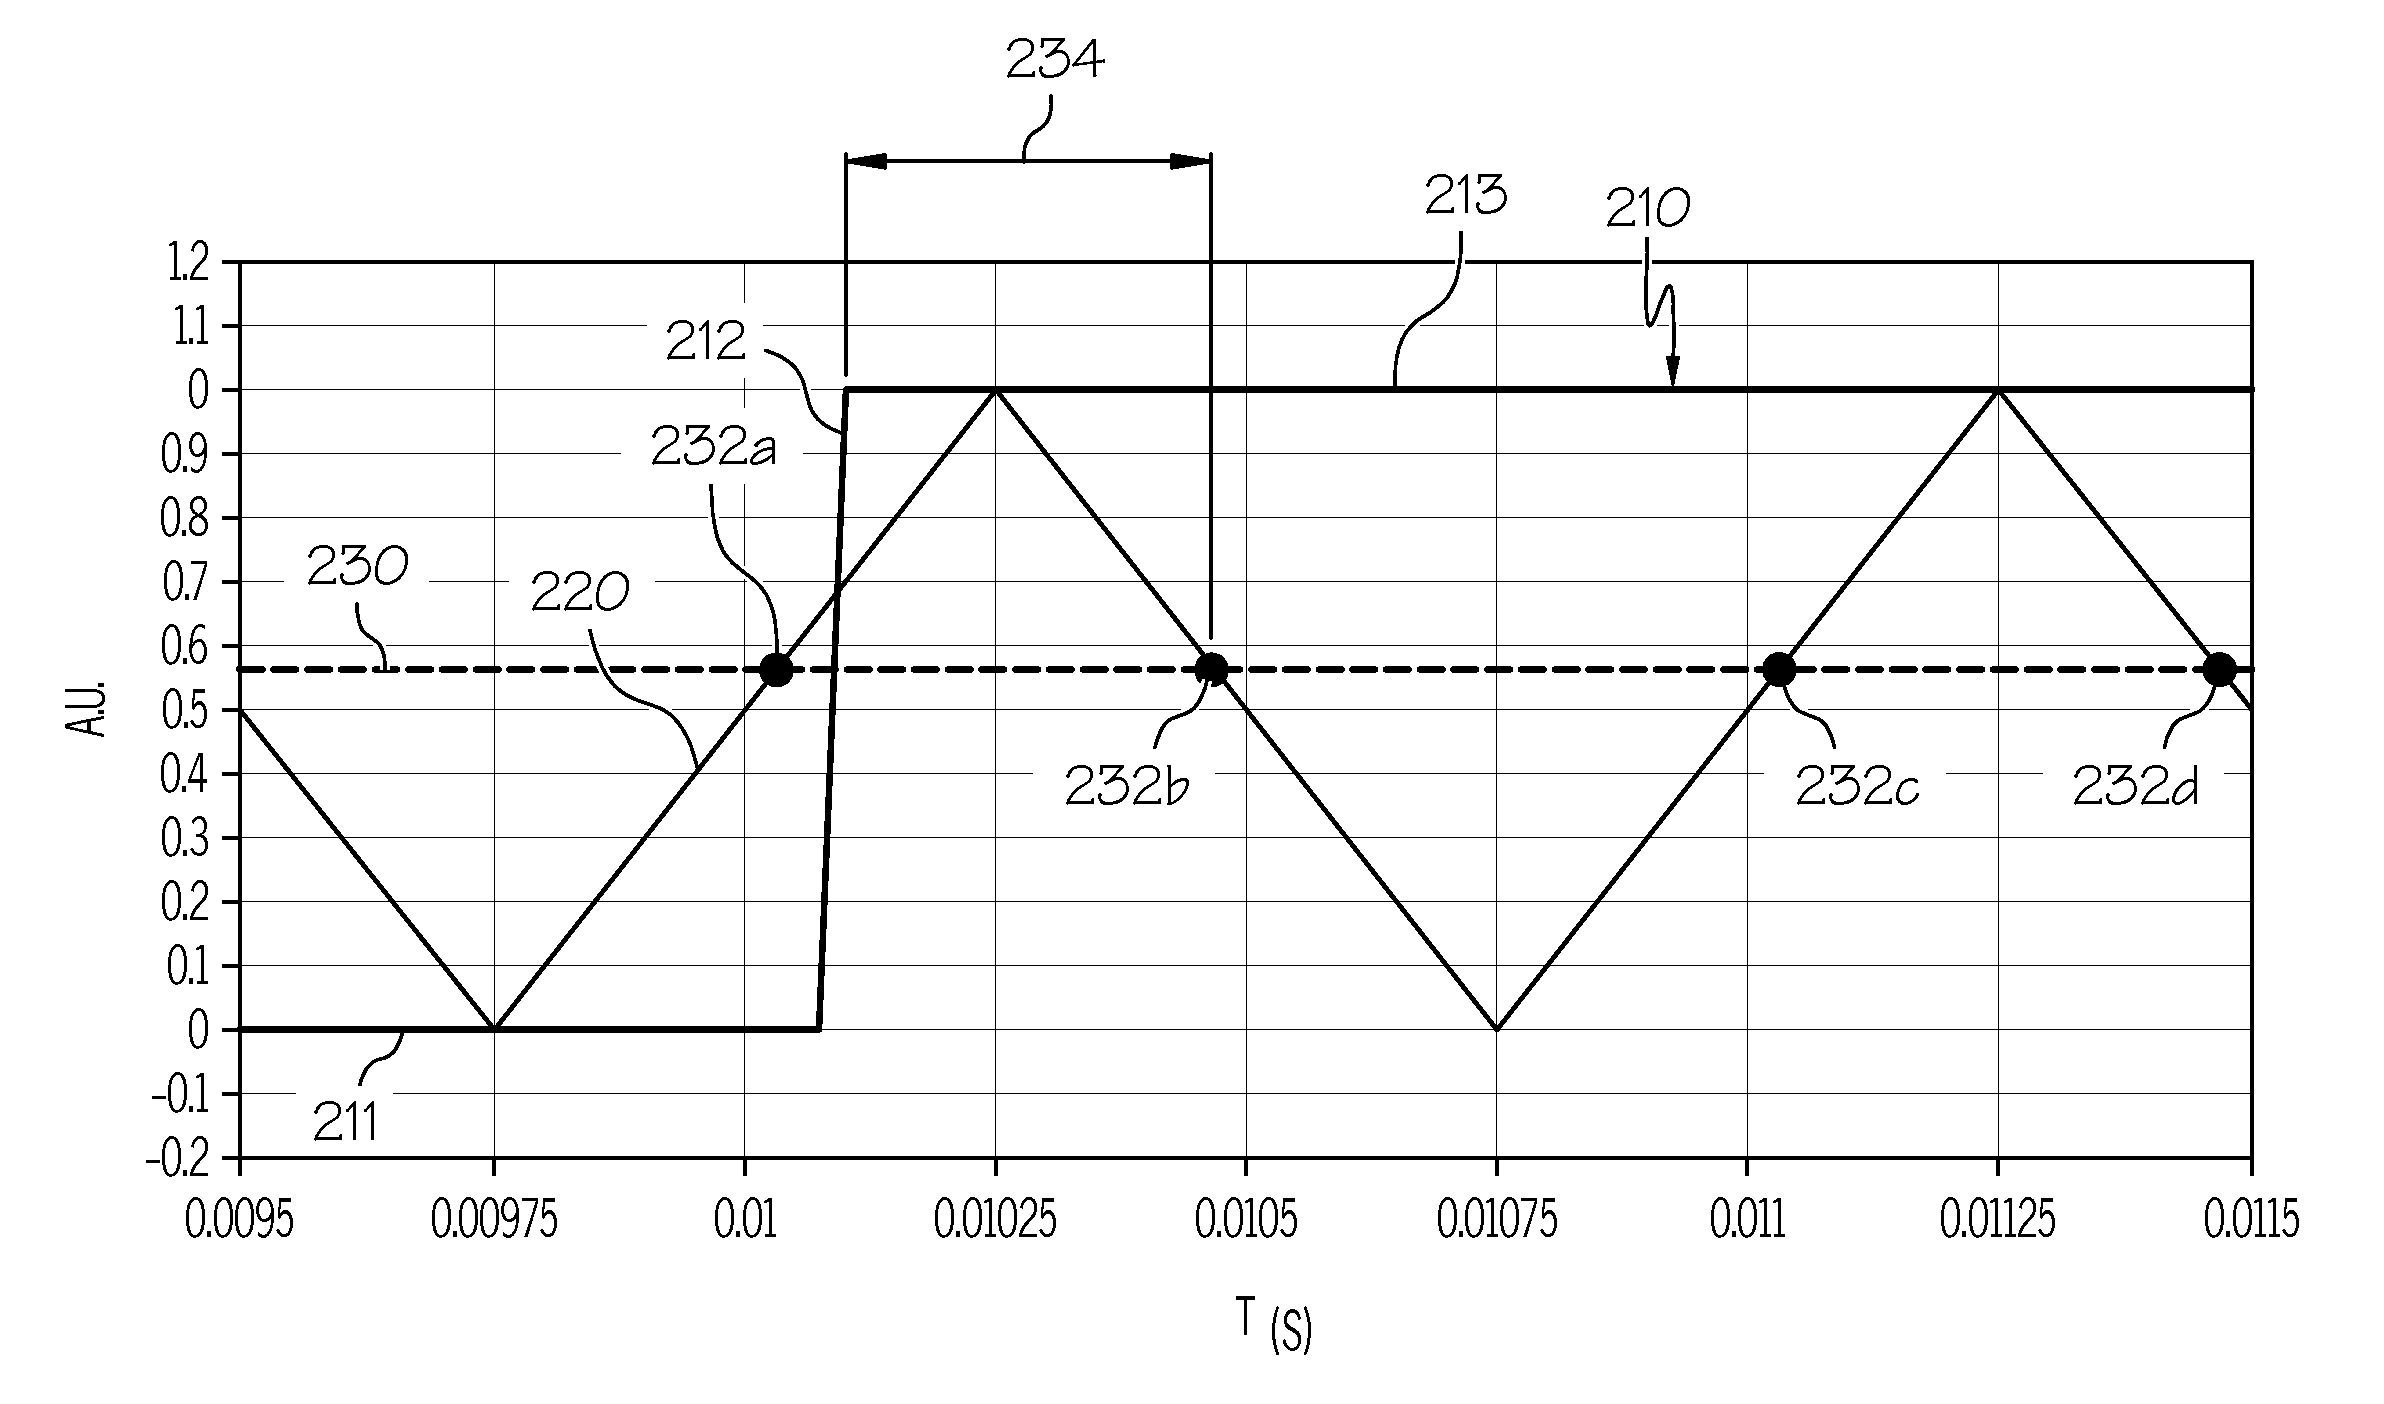 Systems and methods for visible light source evaluation